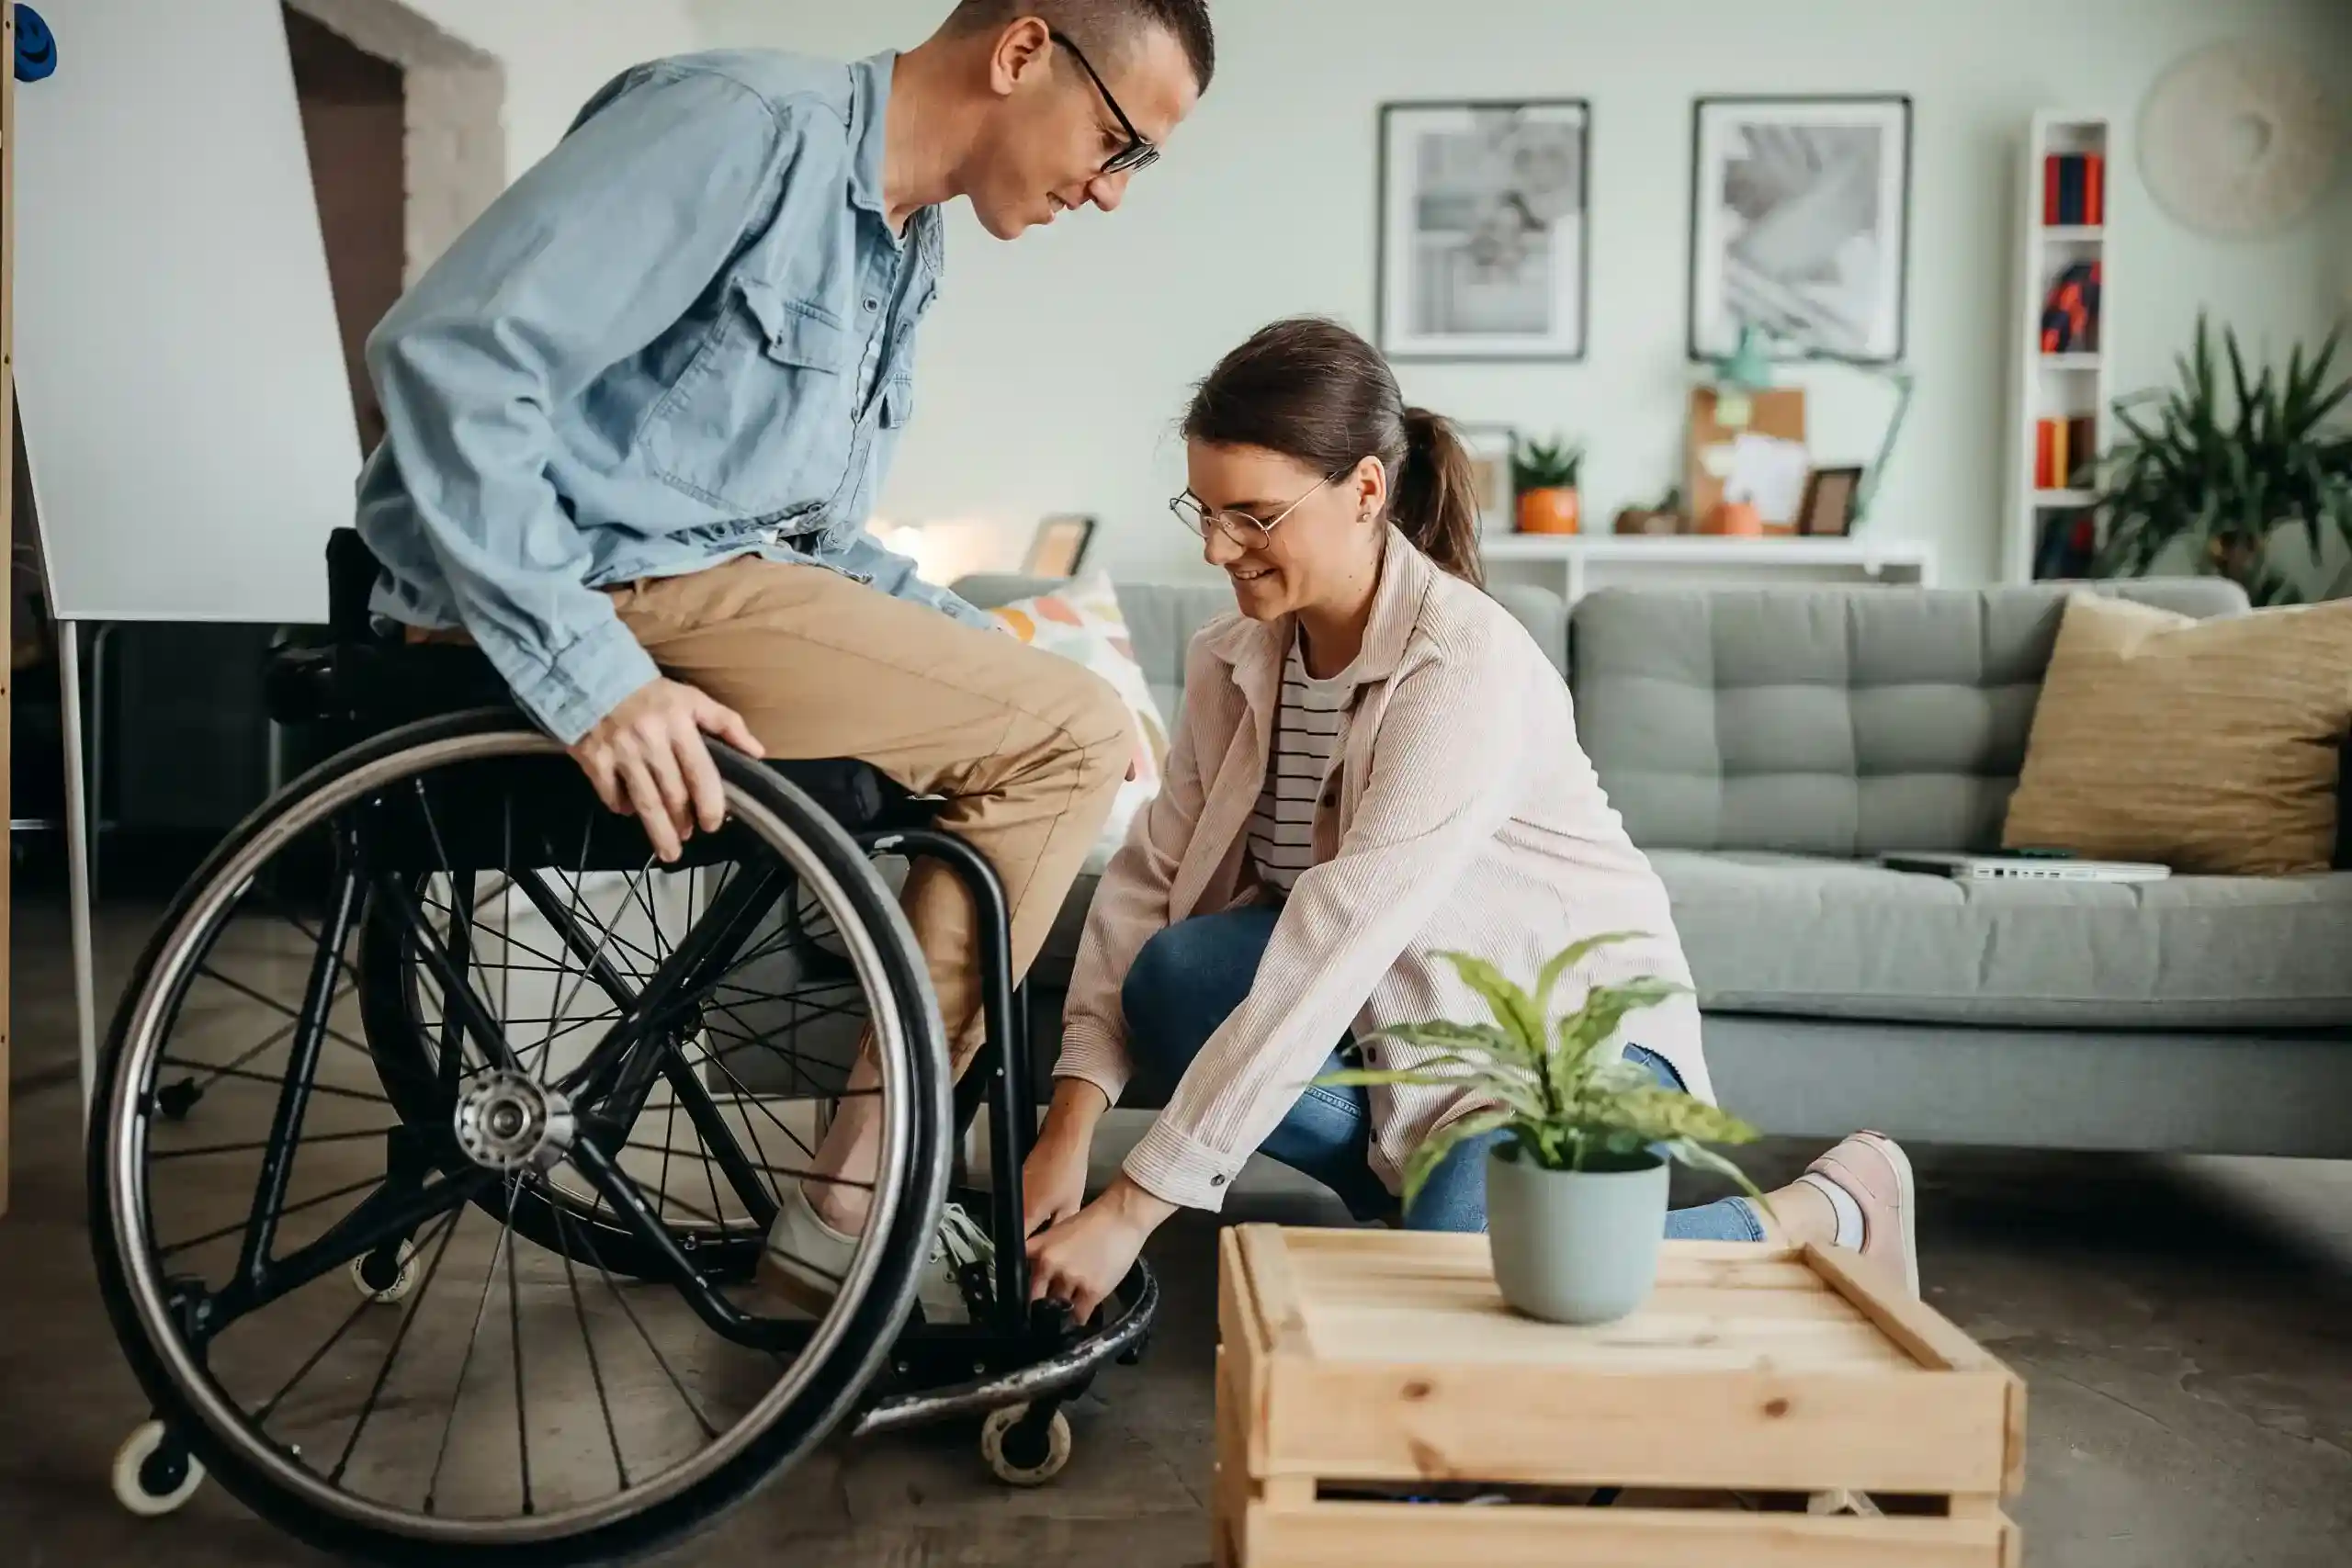 Lady helping a man in a wheelchair